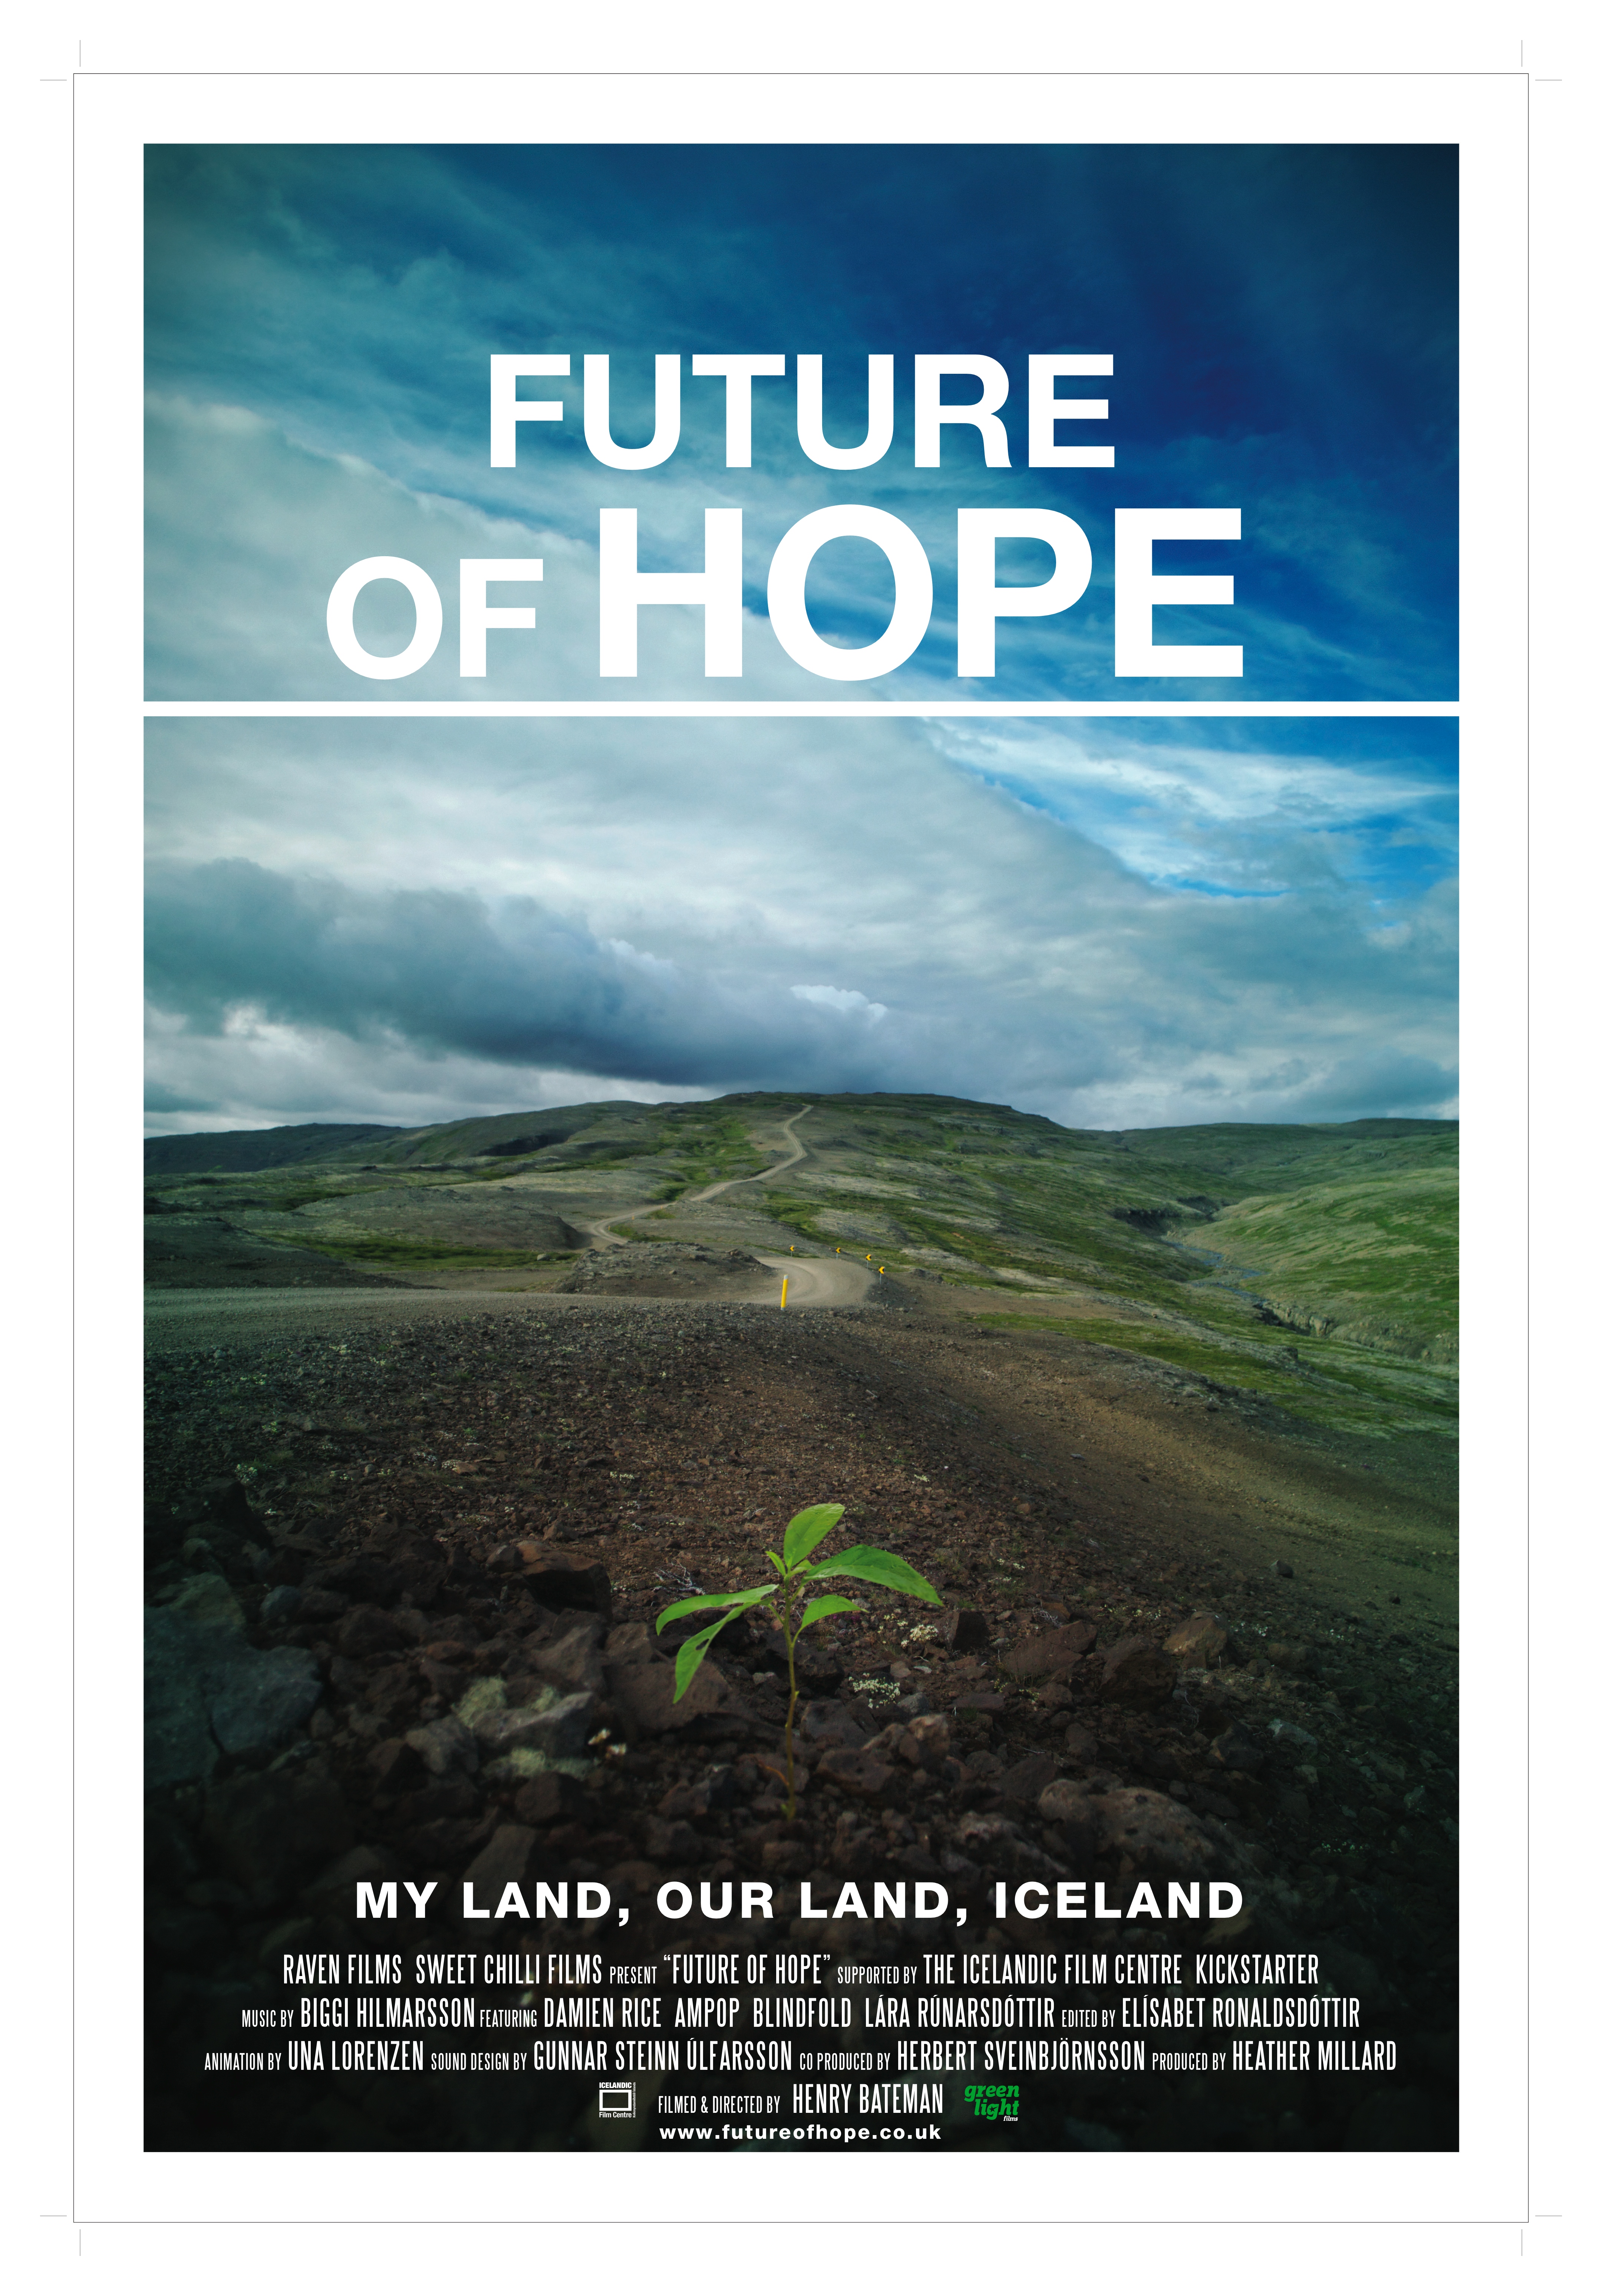 'Future of Hope' Poster feature-length documentary film Producer - Heather Millard http://www.futureofhope.co.uk